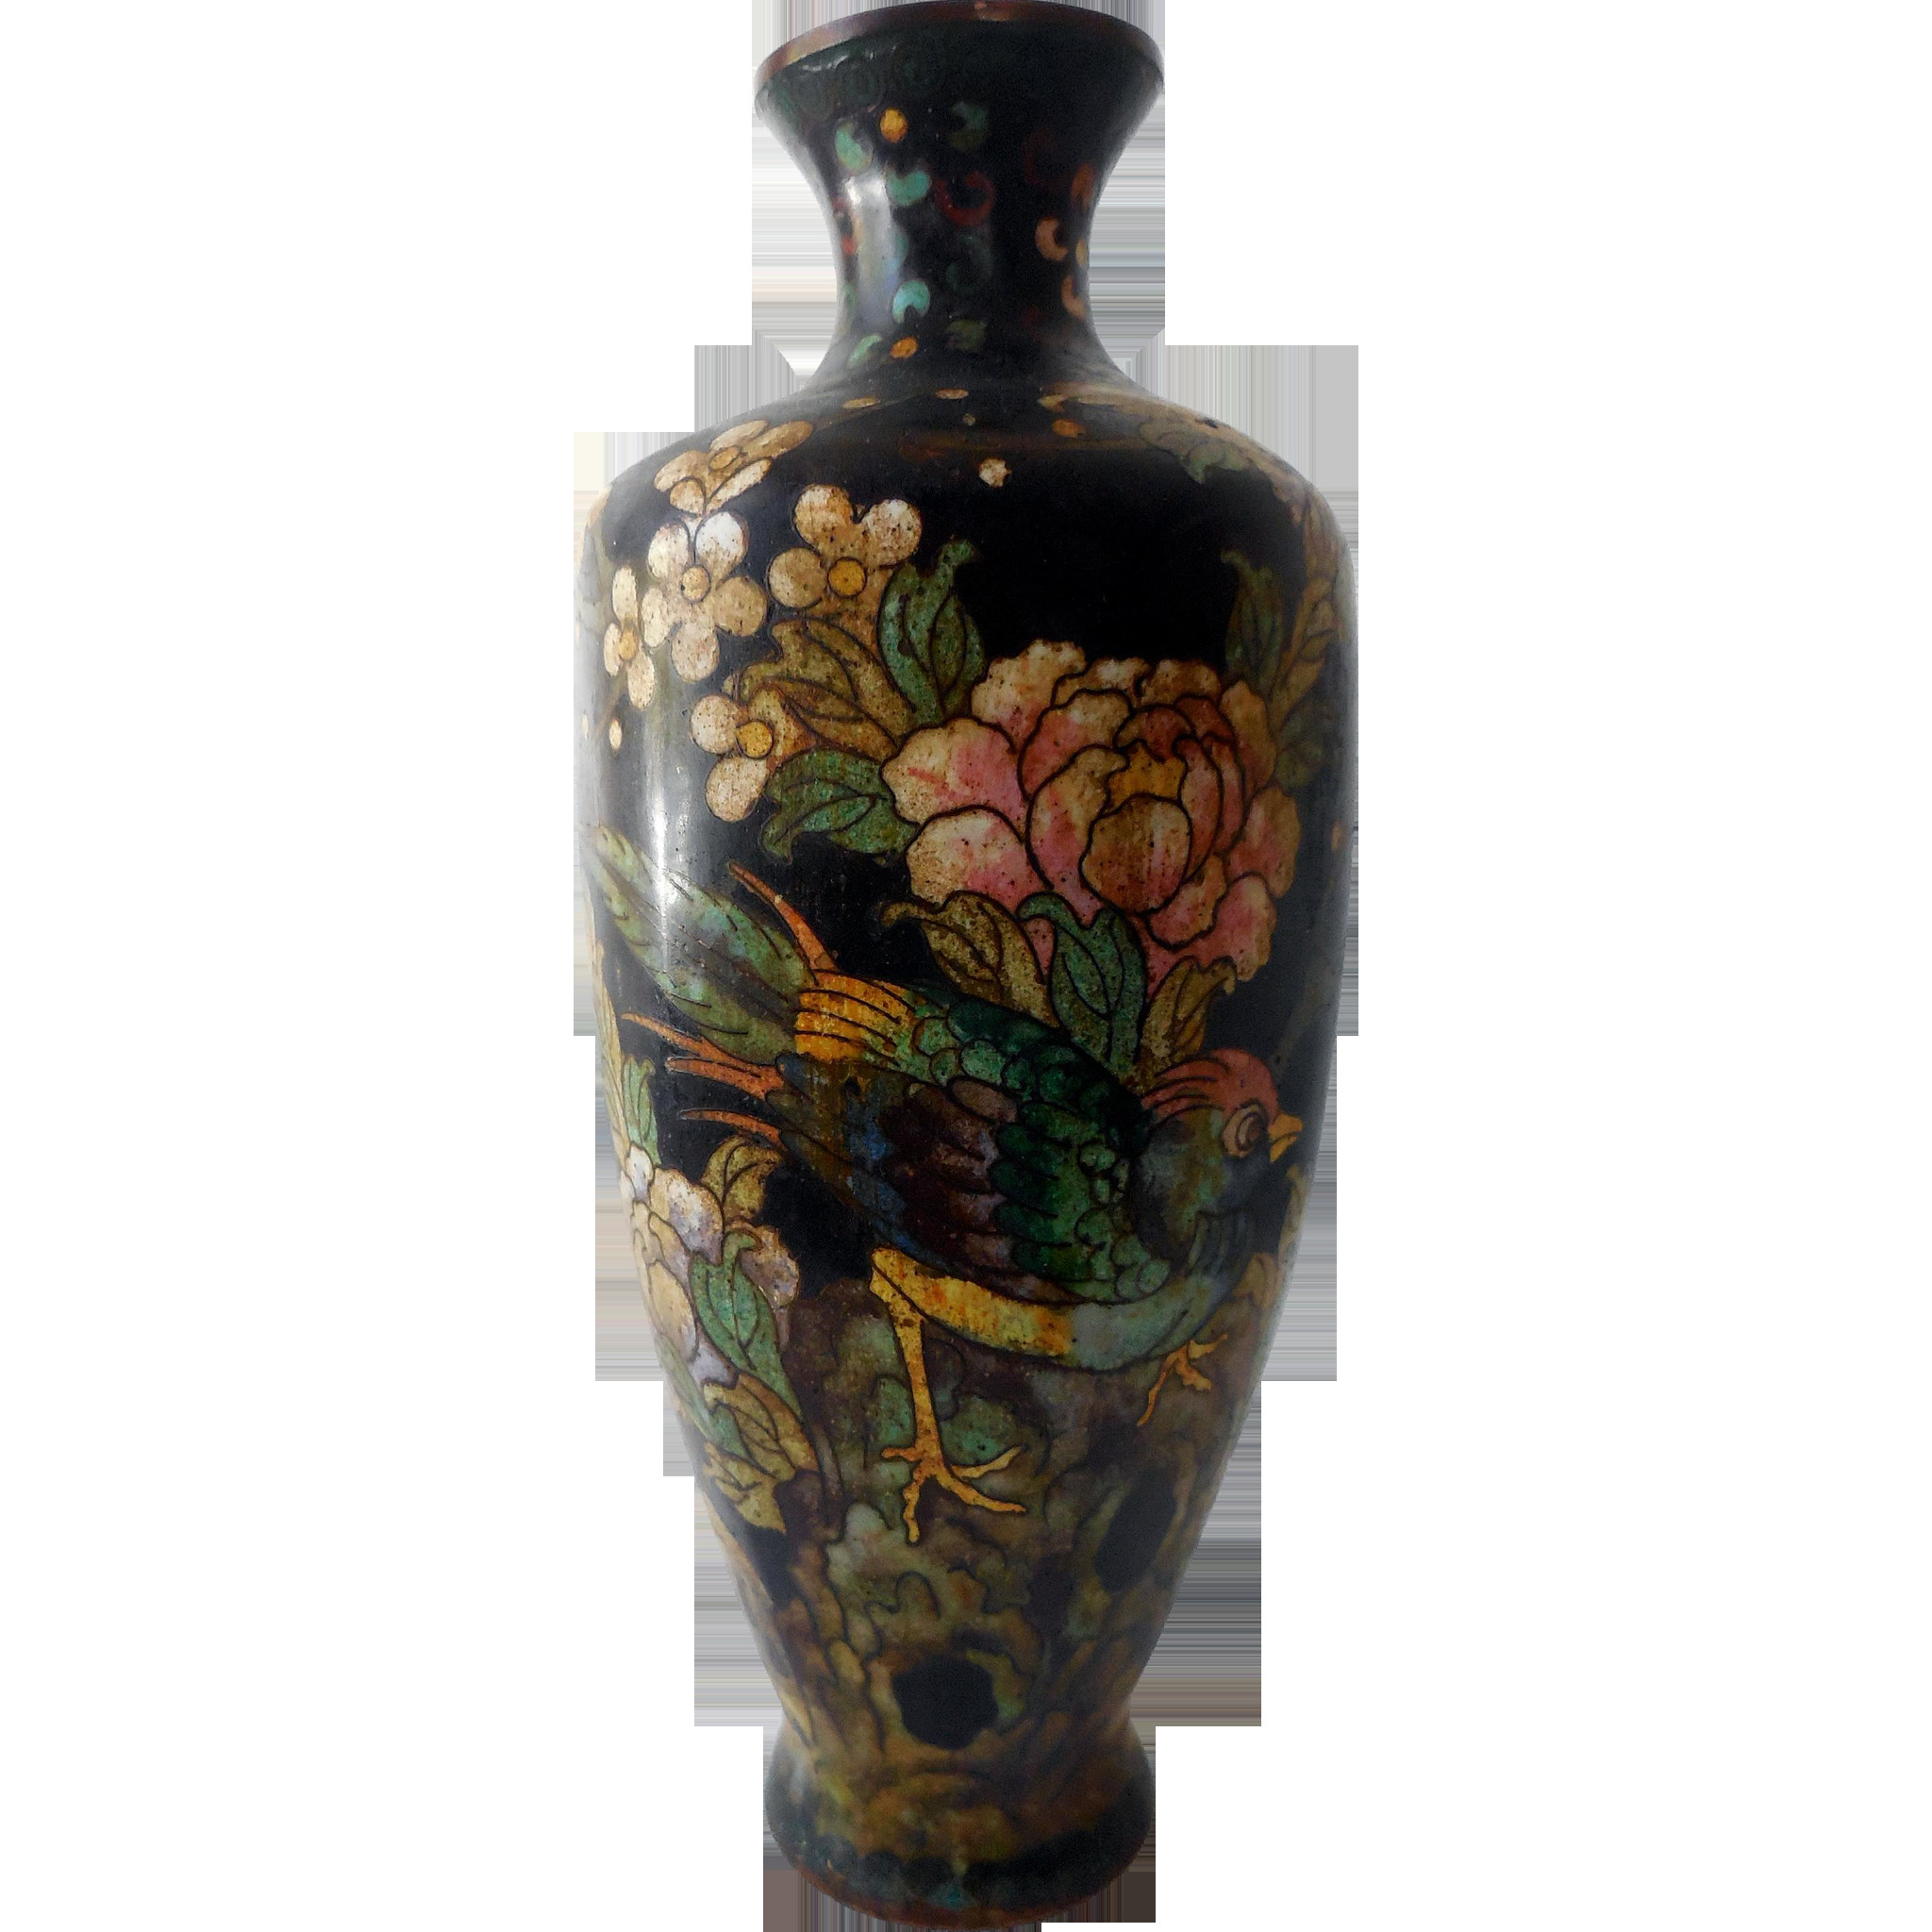 22 Lovable Old oriental Vases 2024 free download old oriental vases of antique chinese cloisonne vase 19th c great ming mark japanese in antique chinese cloisonne vase 19th c great ming mark